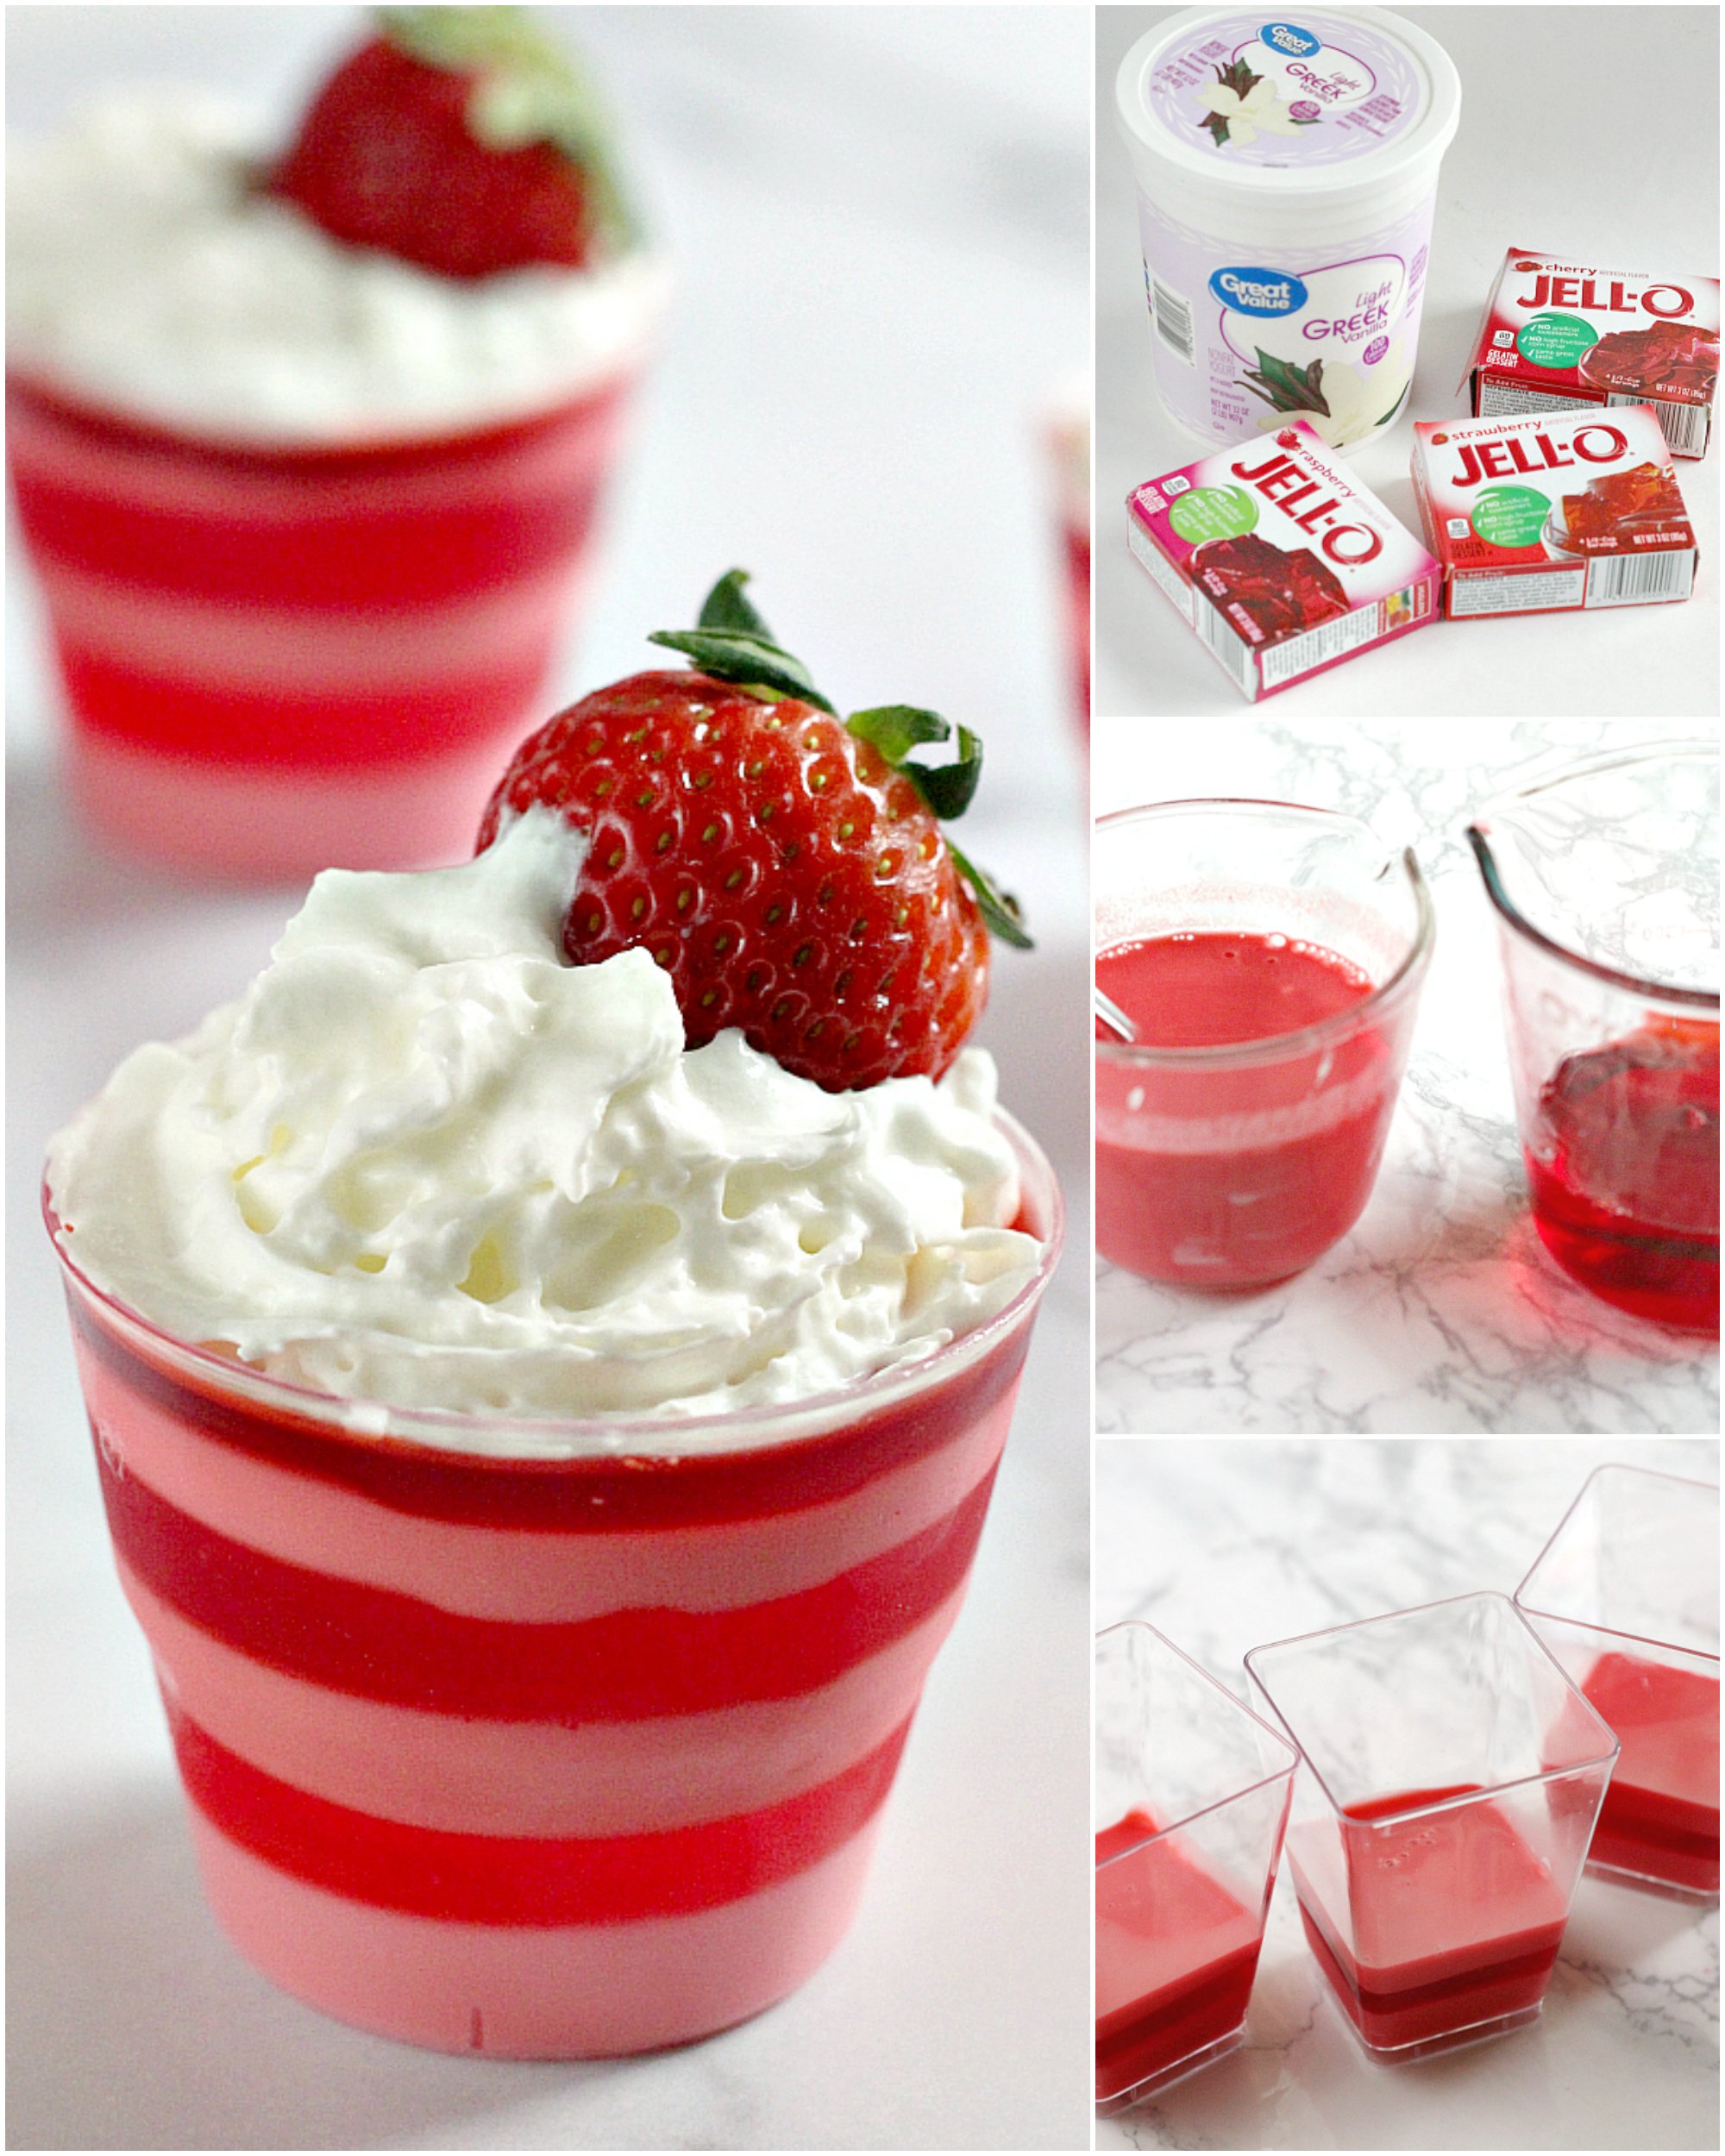 Layered Valentines Jello Cups are so fun and easy to make for Valentines Day! All you need is jello and yogurt to make this delicious and simple jello recipe!